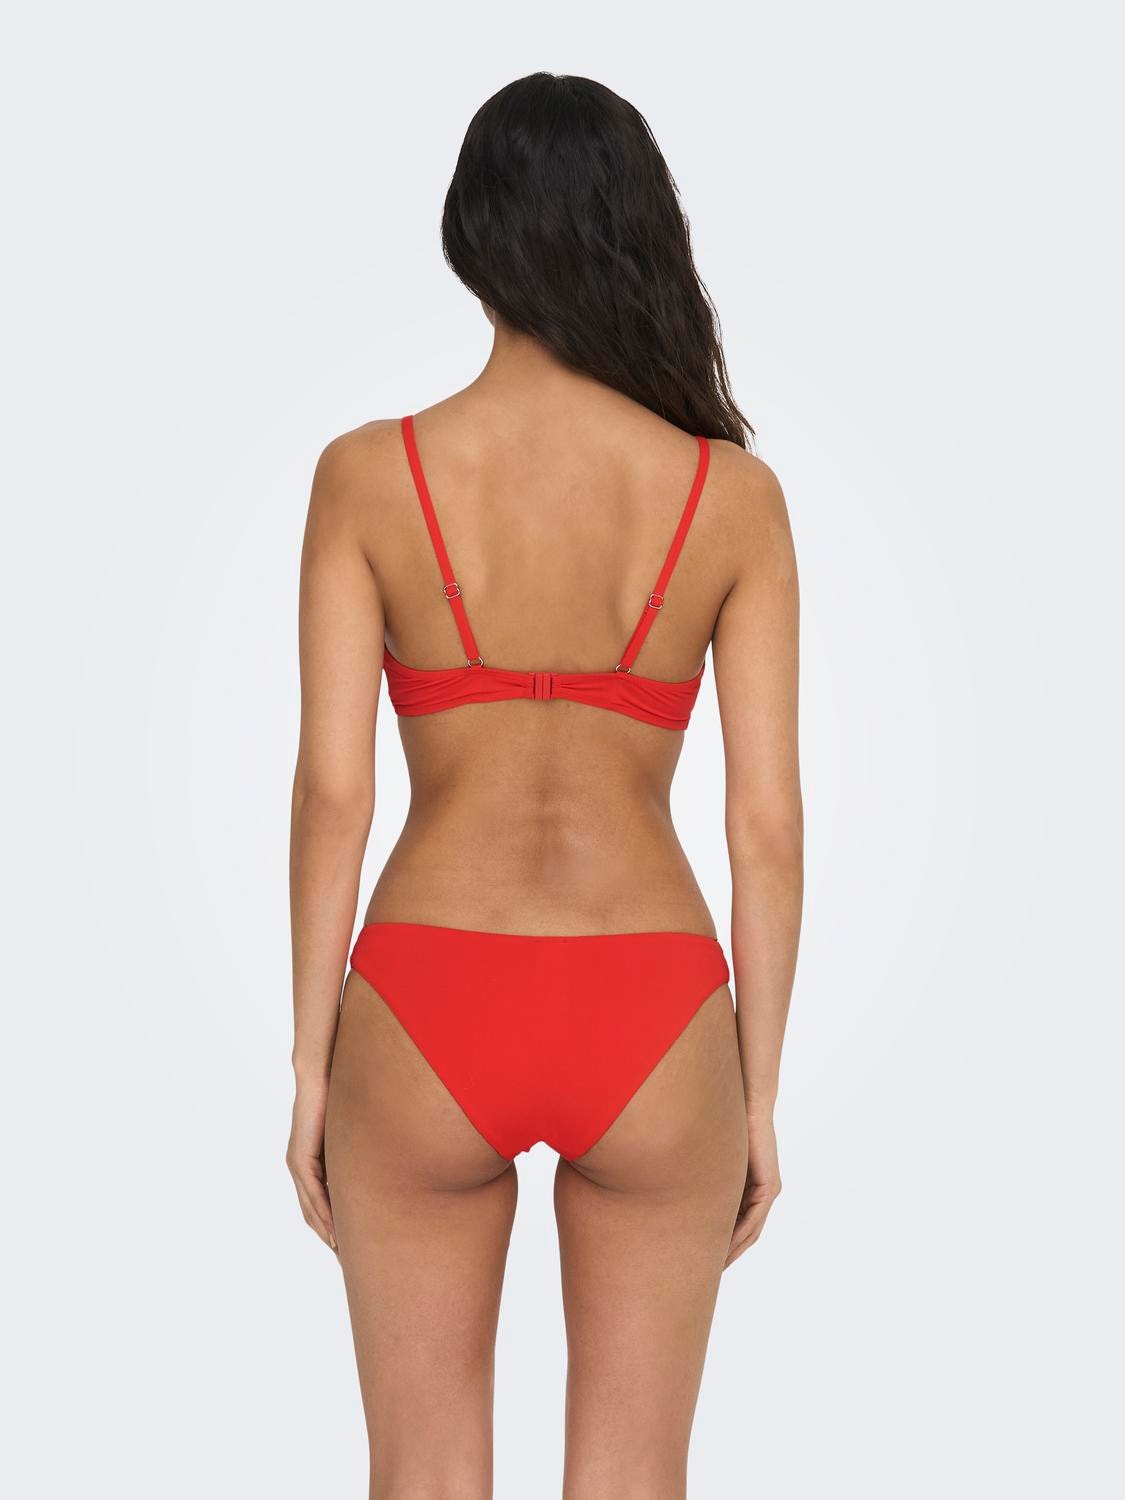 ONLY Niedrige Taille Verstellbare Träger Bademode -Fiery Red - 15259463